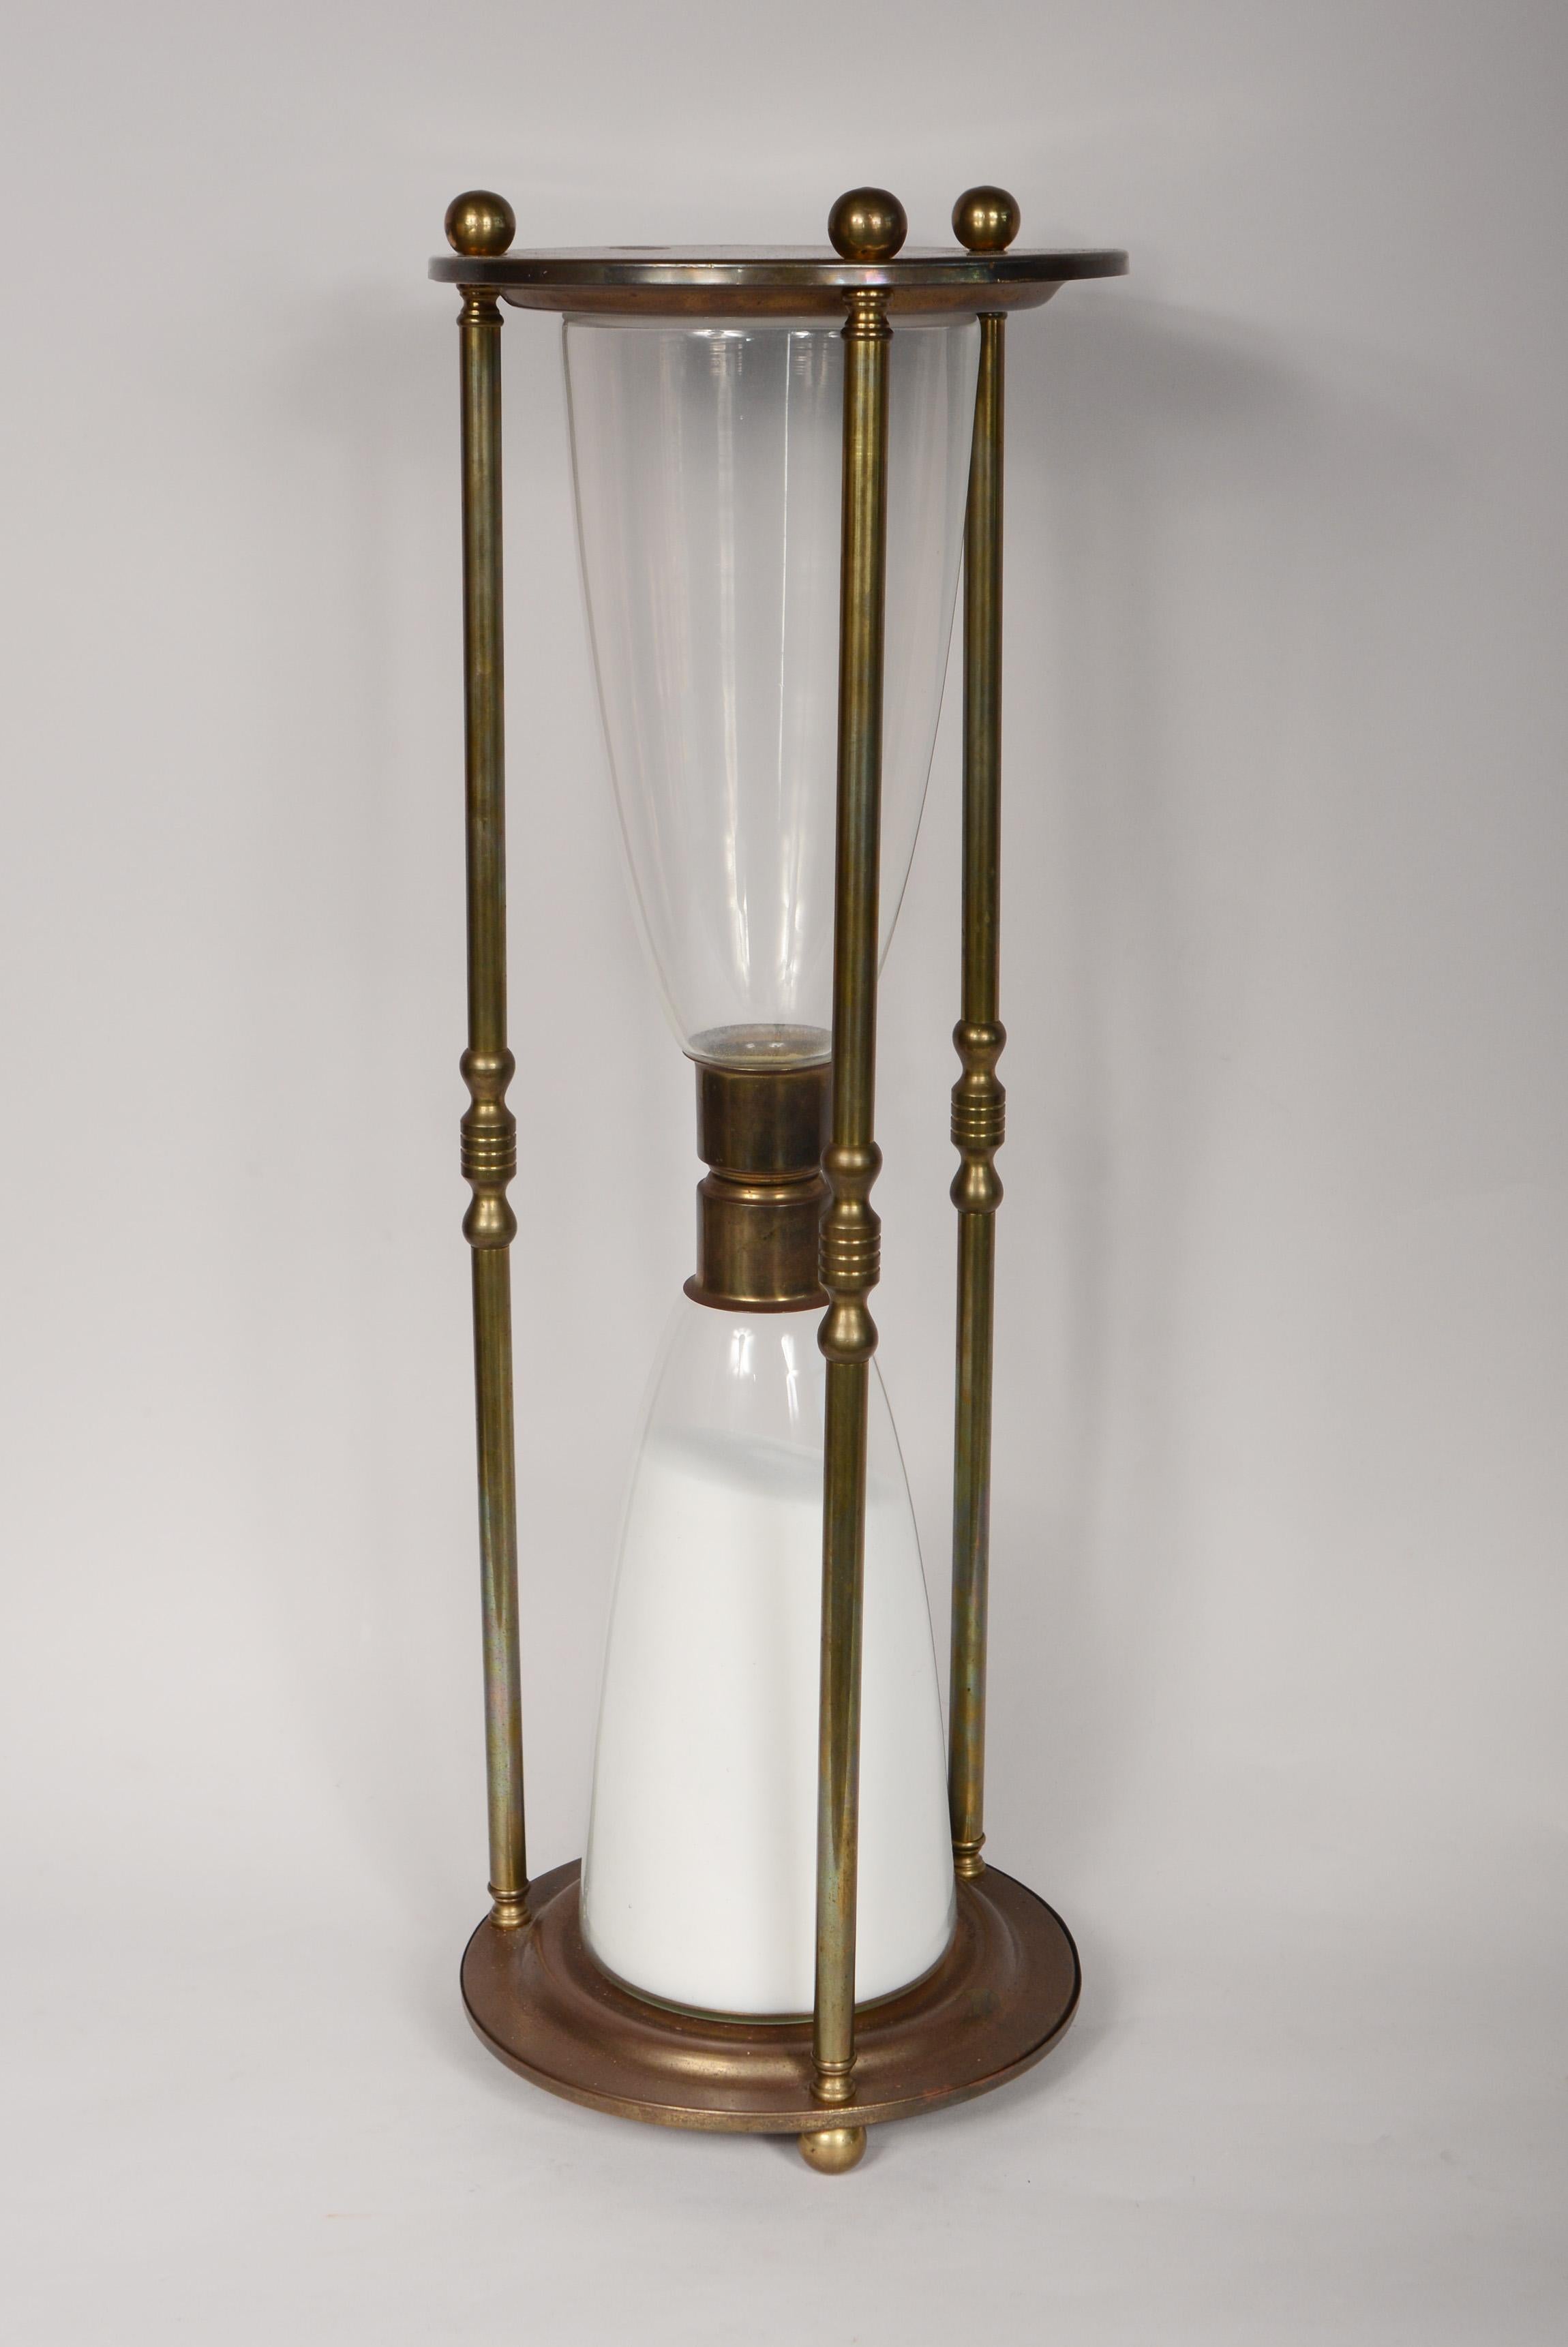 Oversized brass hourglass with ball feet. Pass the time watching the sand fill the bottom of this few hours glass.